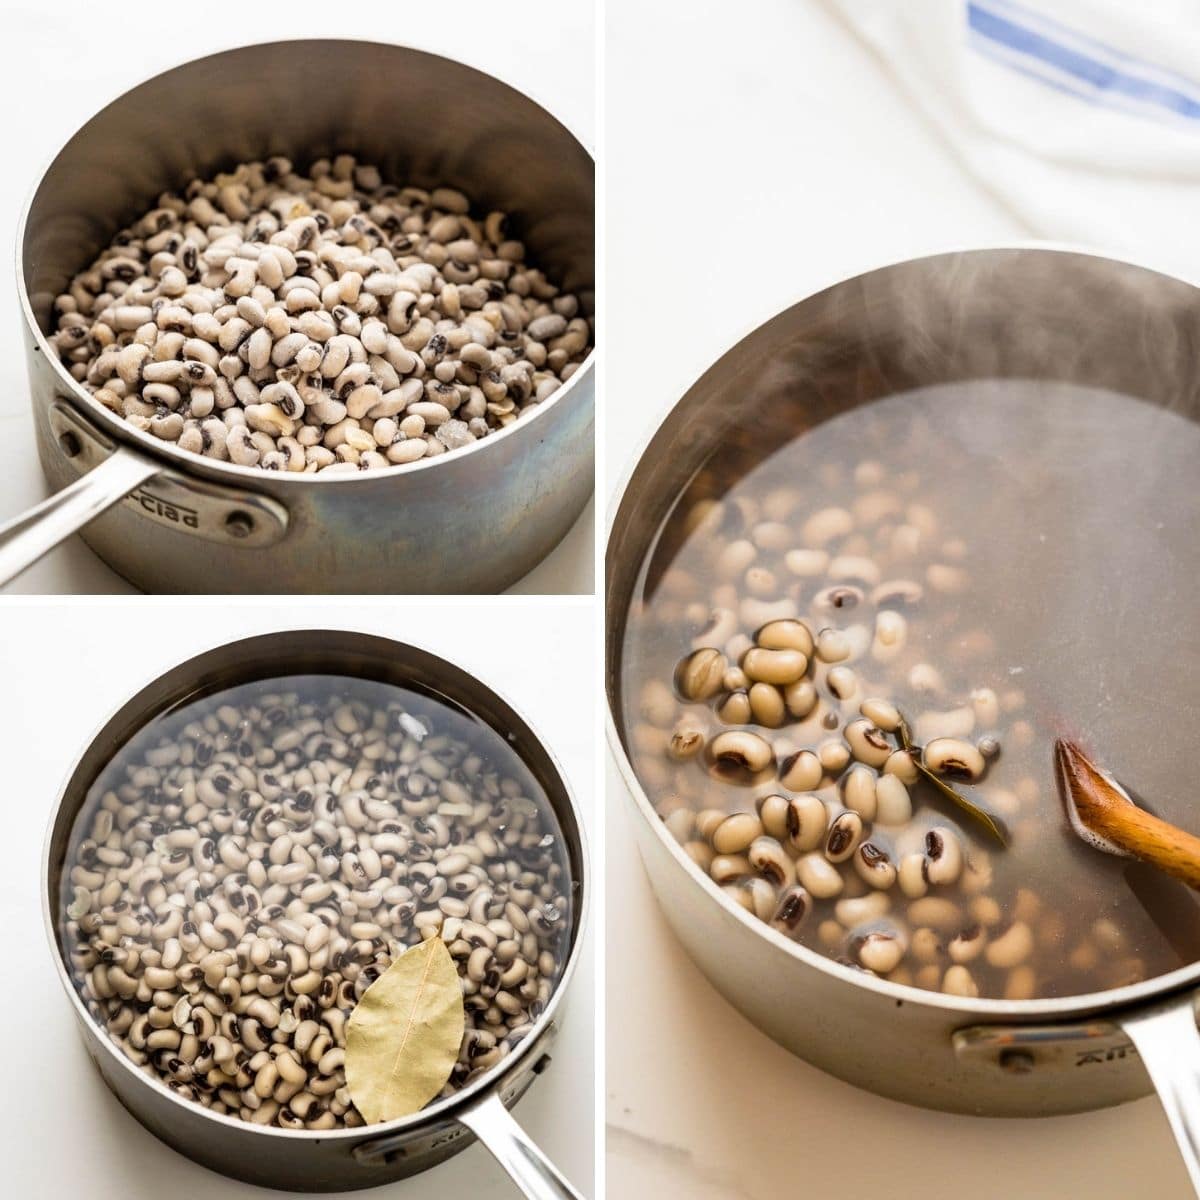 Cooking the black eyed peas.